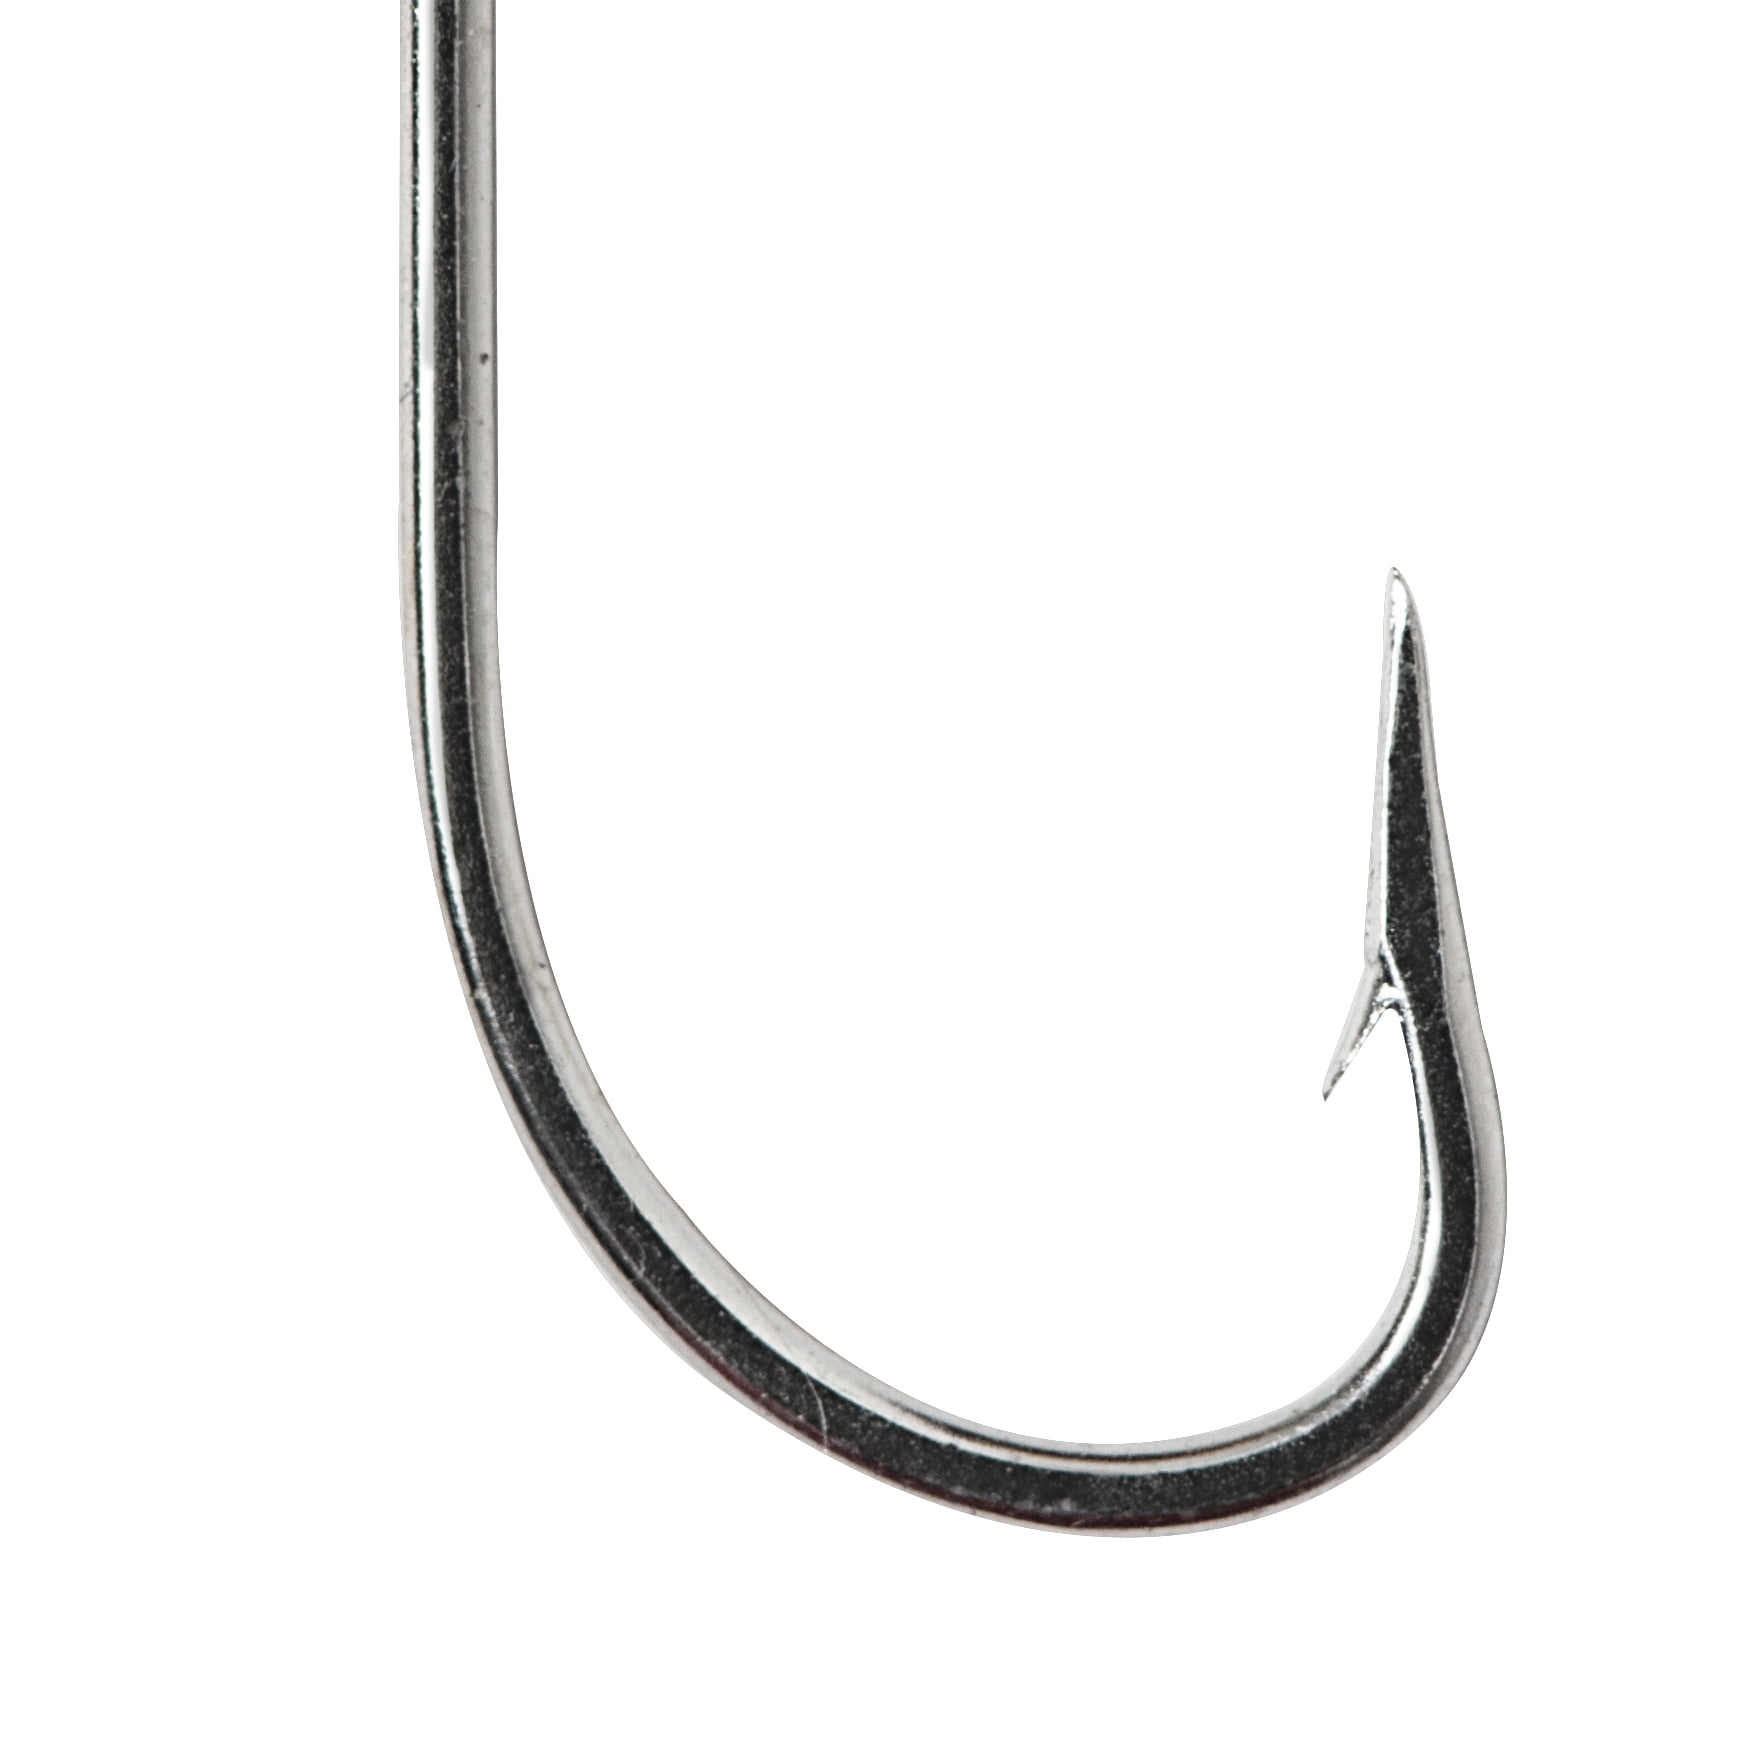 Dr.Fish 20/50 Pack O'shaughnessy Hook Saltwater Fishing Hooks Live